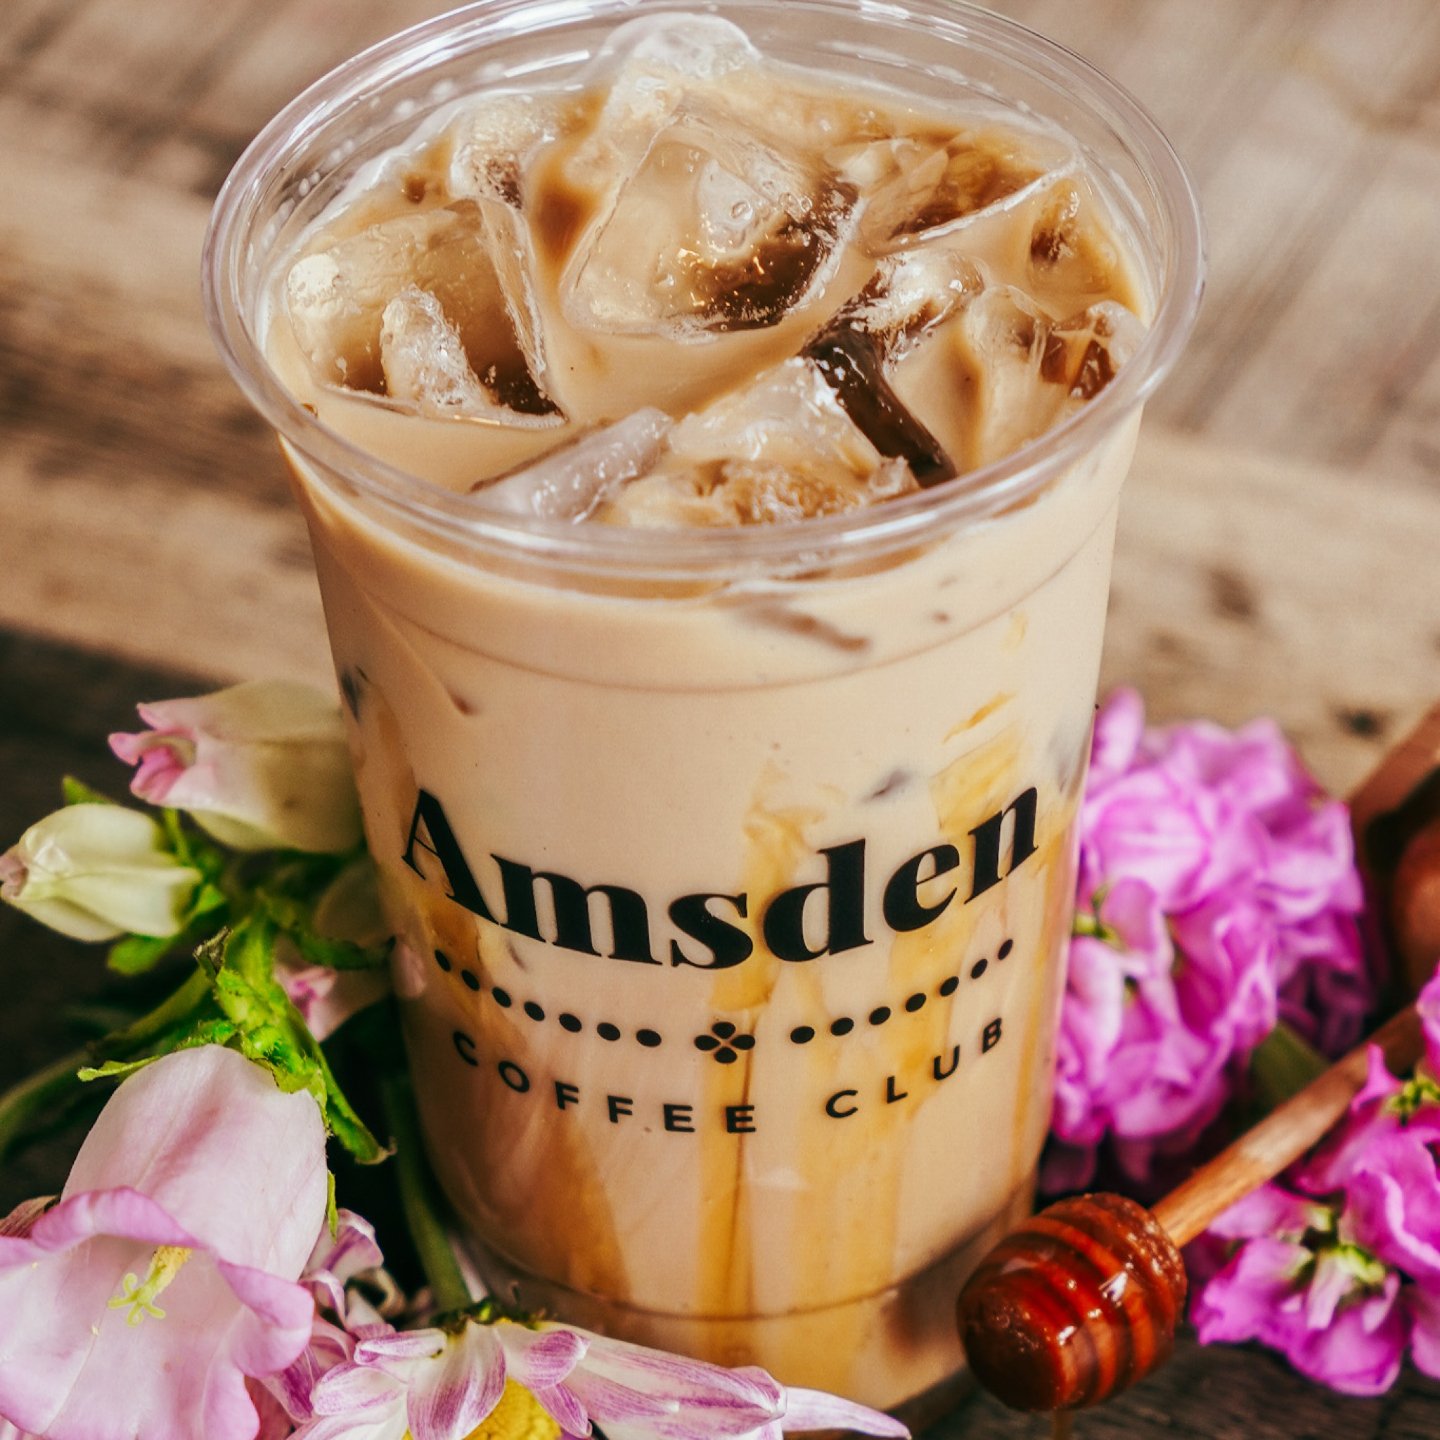 Enjoy a floral frenzy with our Honey Lavender Latte! 🌸✨ Get ready to sip, relax, and let the lavender vibes whisk you away to a land of caffeinated bliss! 💜☕

#theamsden #amsden #amsdencoffeeclub #gathermercantile #sharethelex #versailles #shoploca